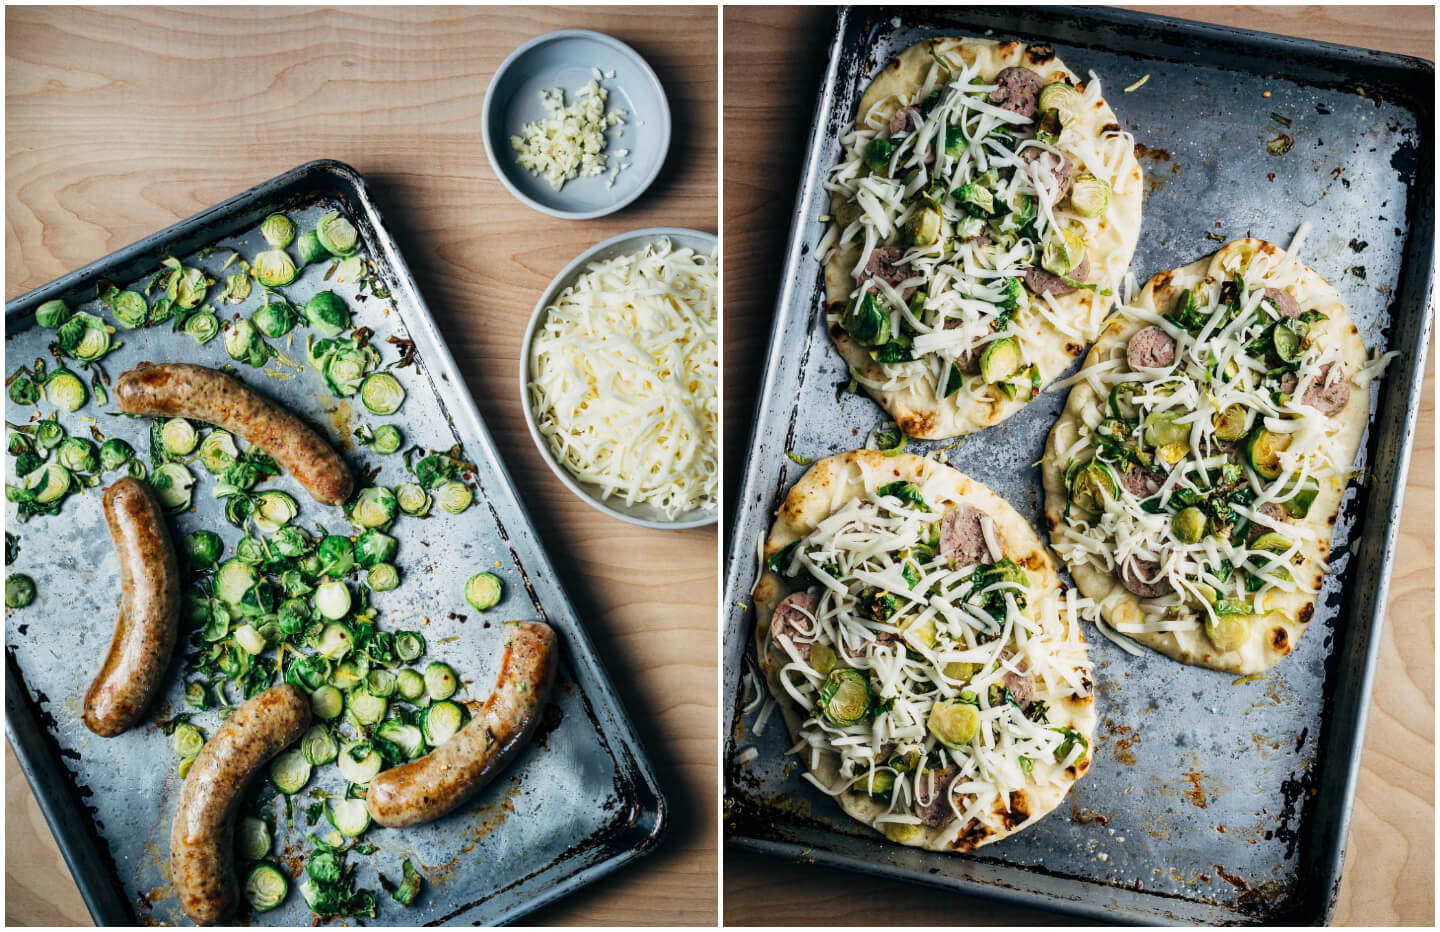 These sausage and Brussels sprout flatbread pizzas feature golden-edged roasted Brussels sprouts alongside tender sausage and melty mozzarella. Lemon zest and red pepper flakes punctuate the pizzas with brightness and heat, and lend a delightful complexity to this weeknight-friendly dish.